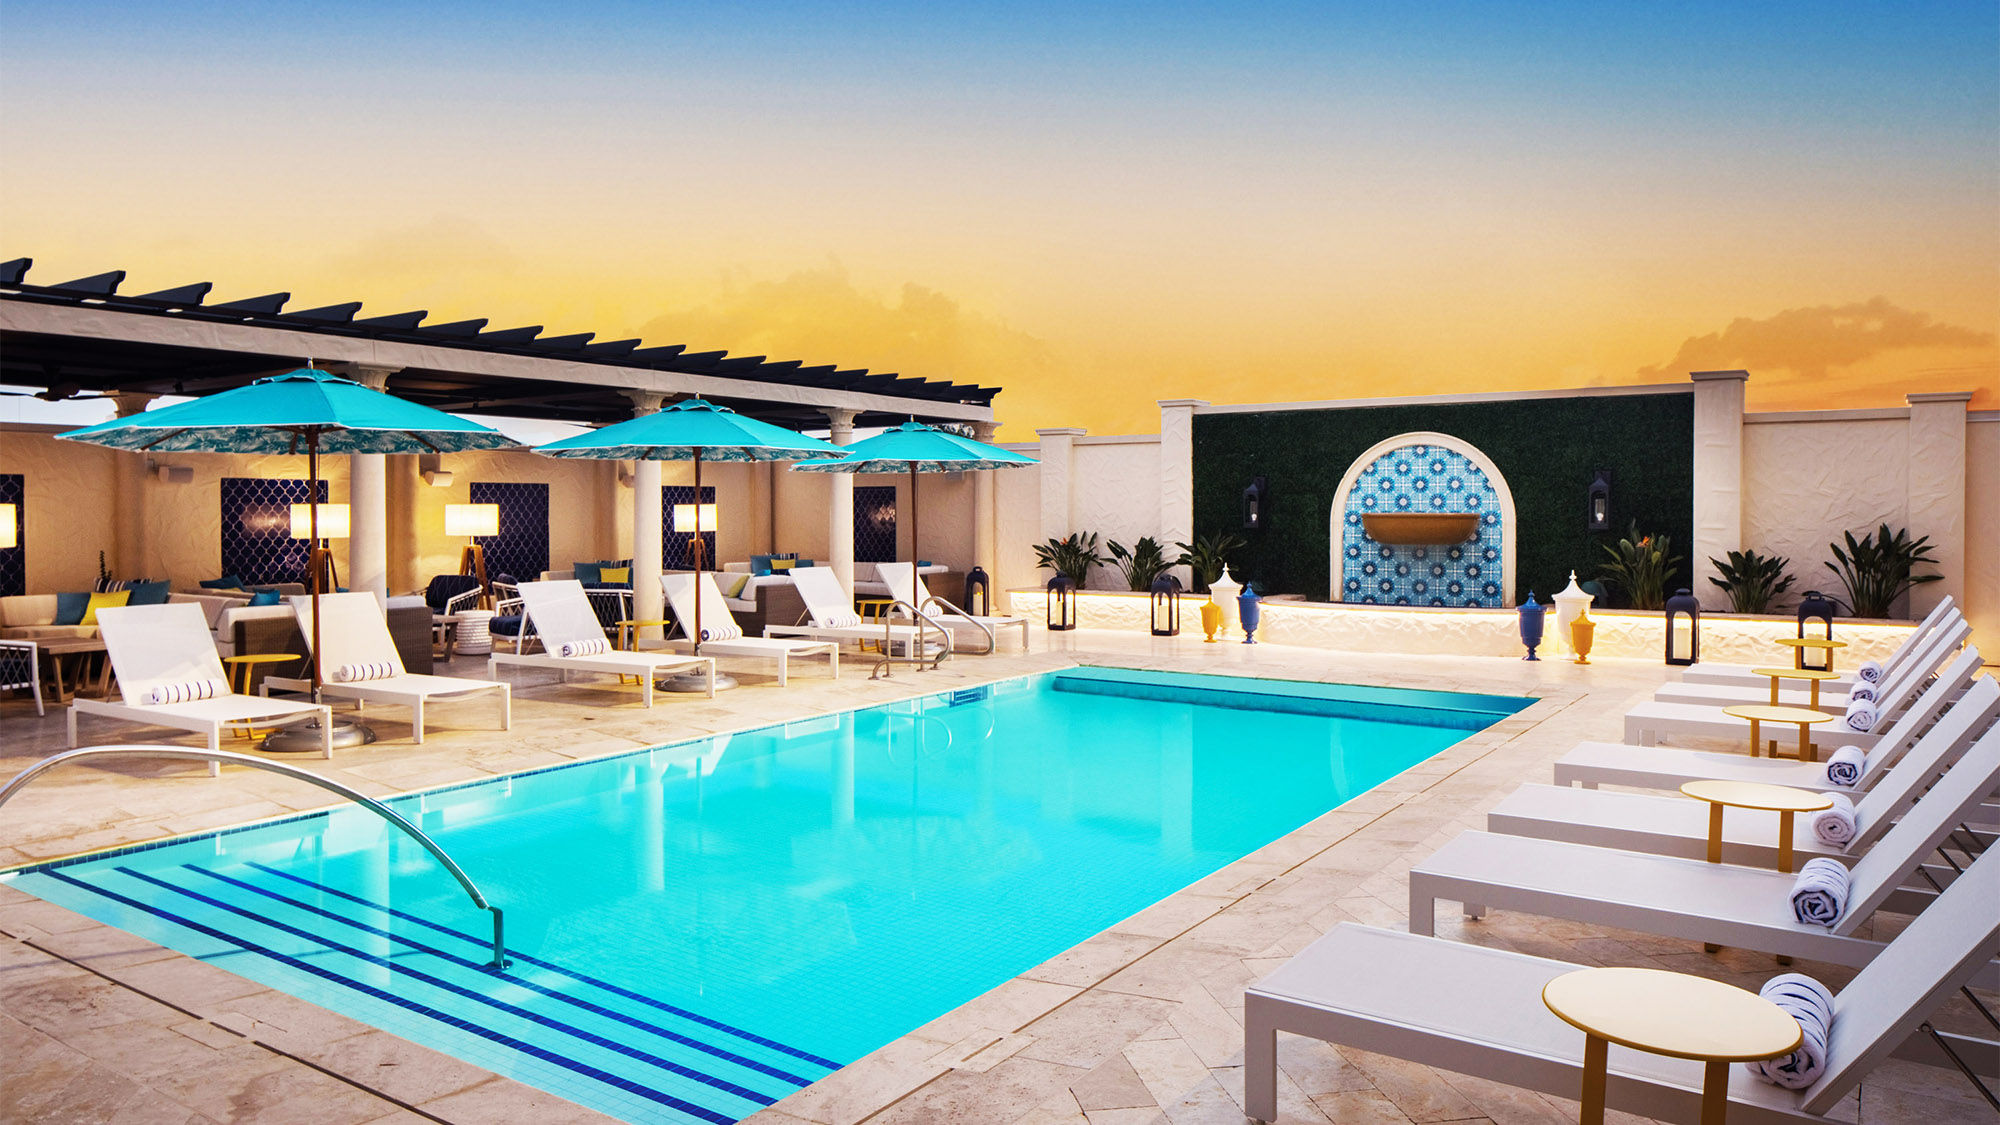 The Alfond Inn at Rollins College has a full-service spa with a dedicated adults-only pool.